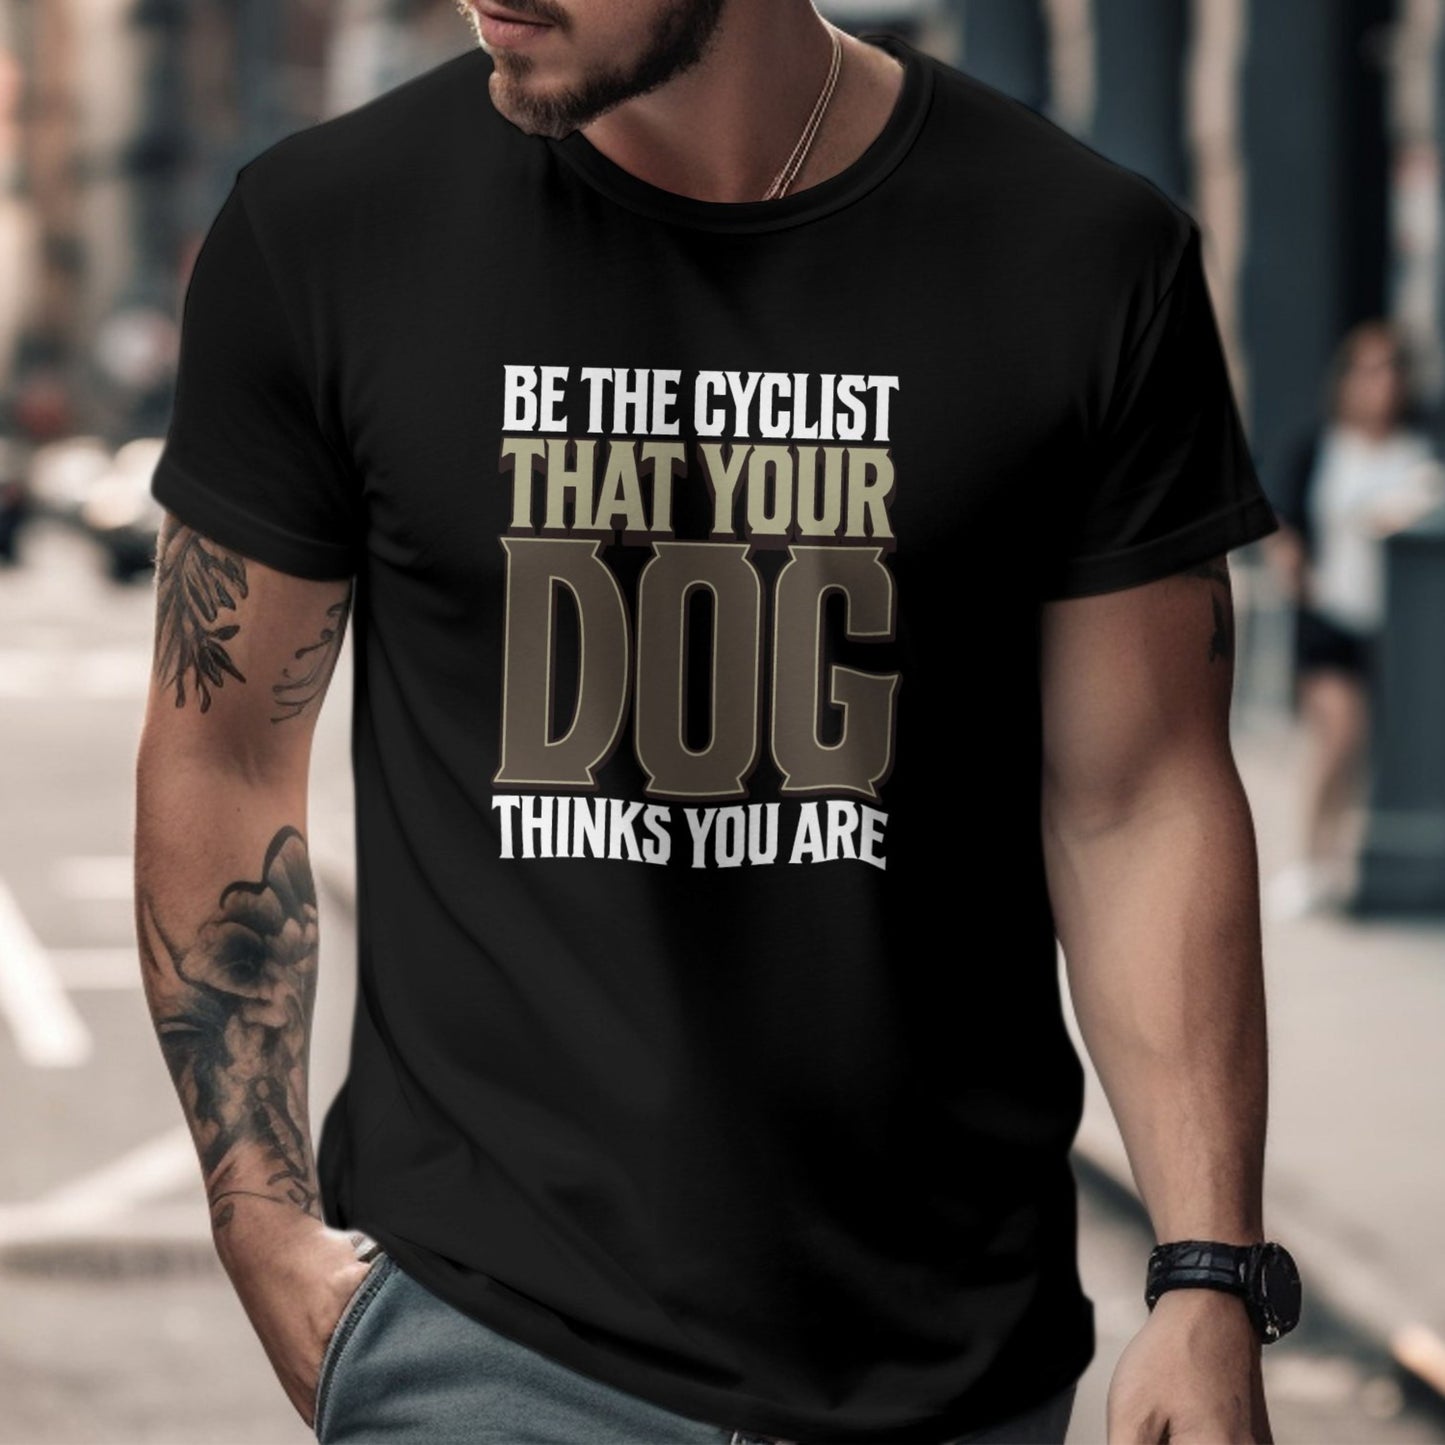 Bike Bliss Be the cyclist that your dog thinks you are T-Shirt for Men Model 2